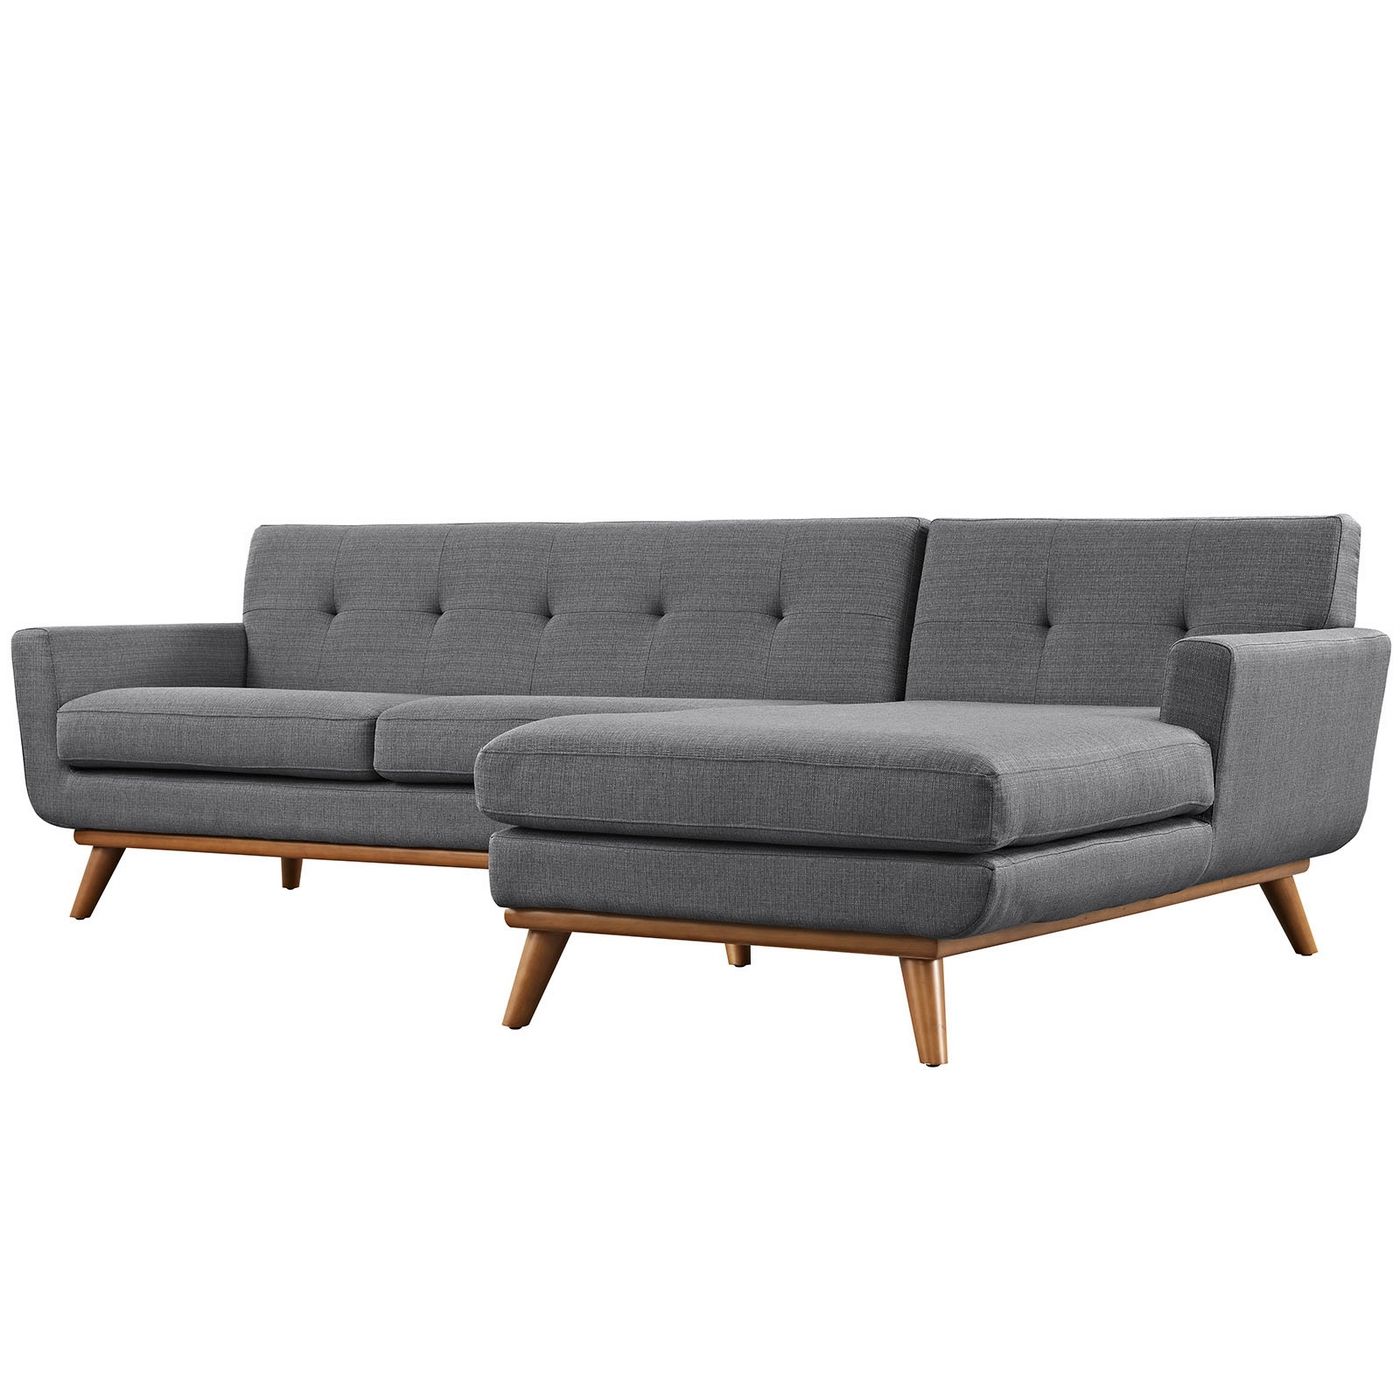 Florence Mid Century Modern Left Sectional Sofas Regarding Most Recently Released Mid Century Modern Engage Left Facing Sectional Sofa W (View 16 of 20)